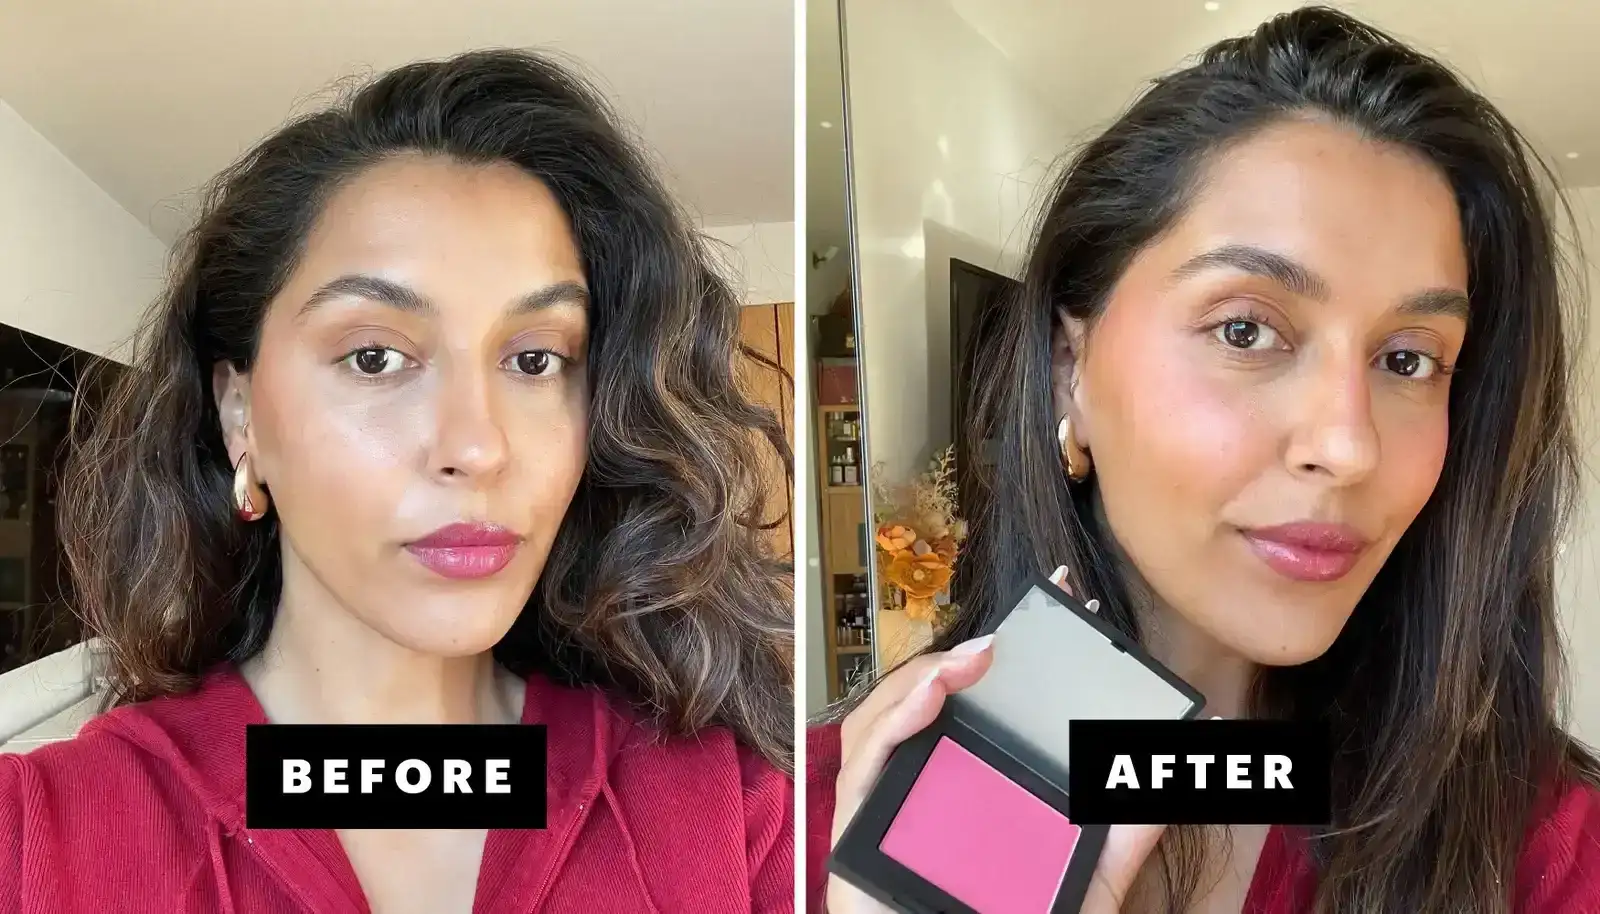 How Does the Reformulated Nars Blush Compare to the Original?